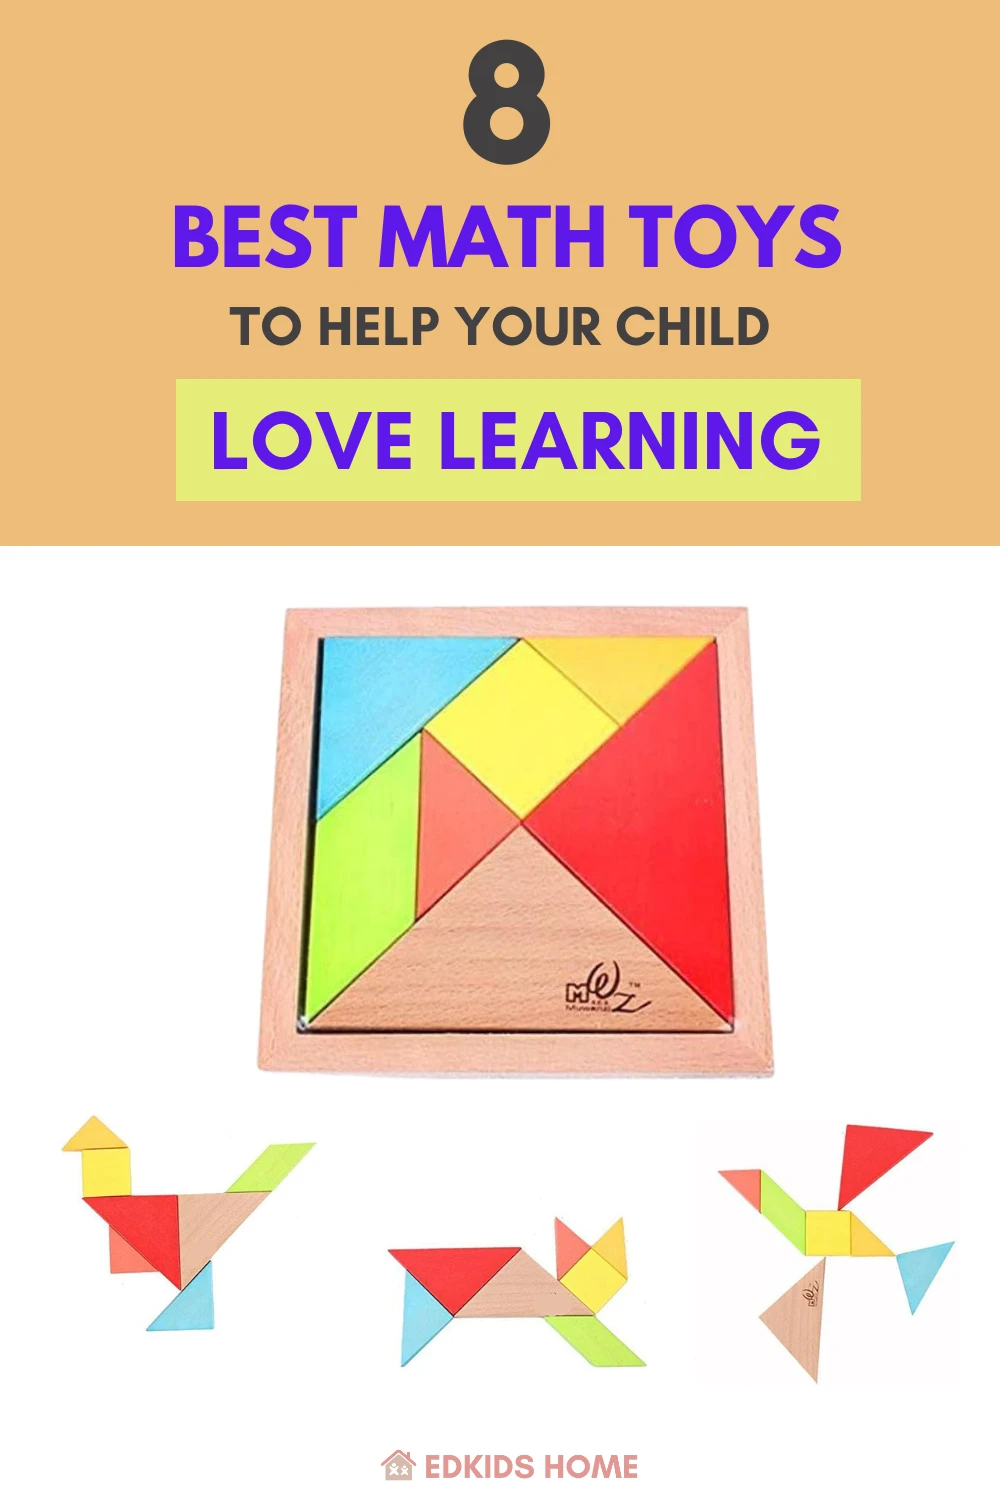 8 Best math toys to help your child love learning